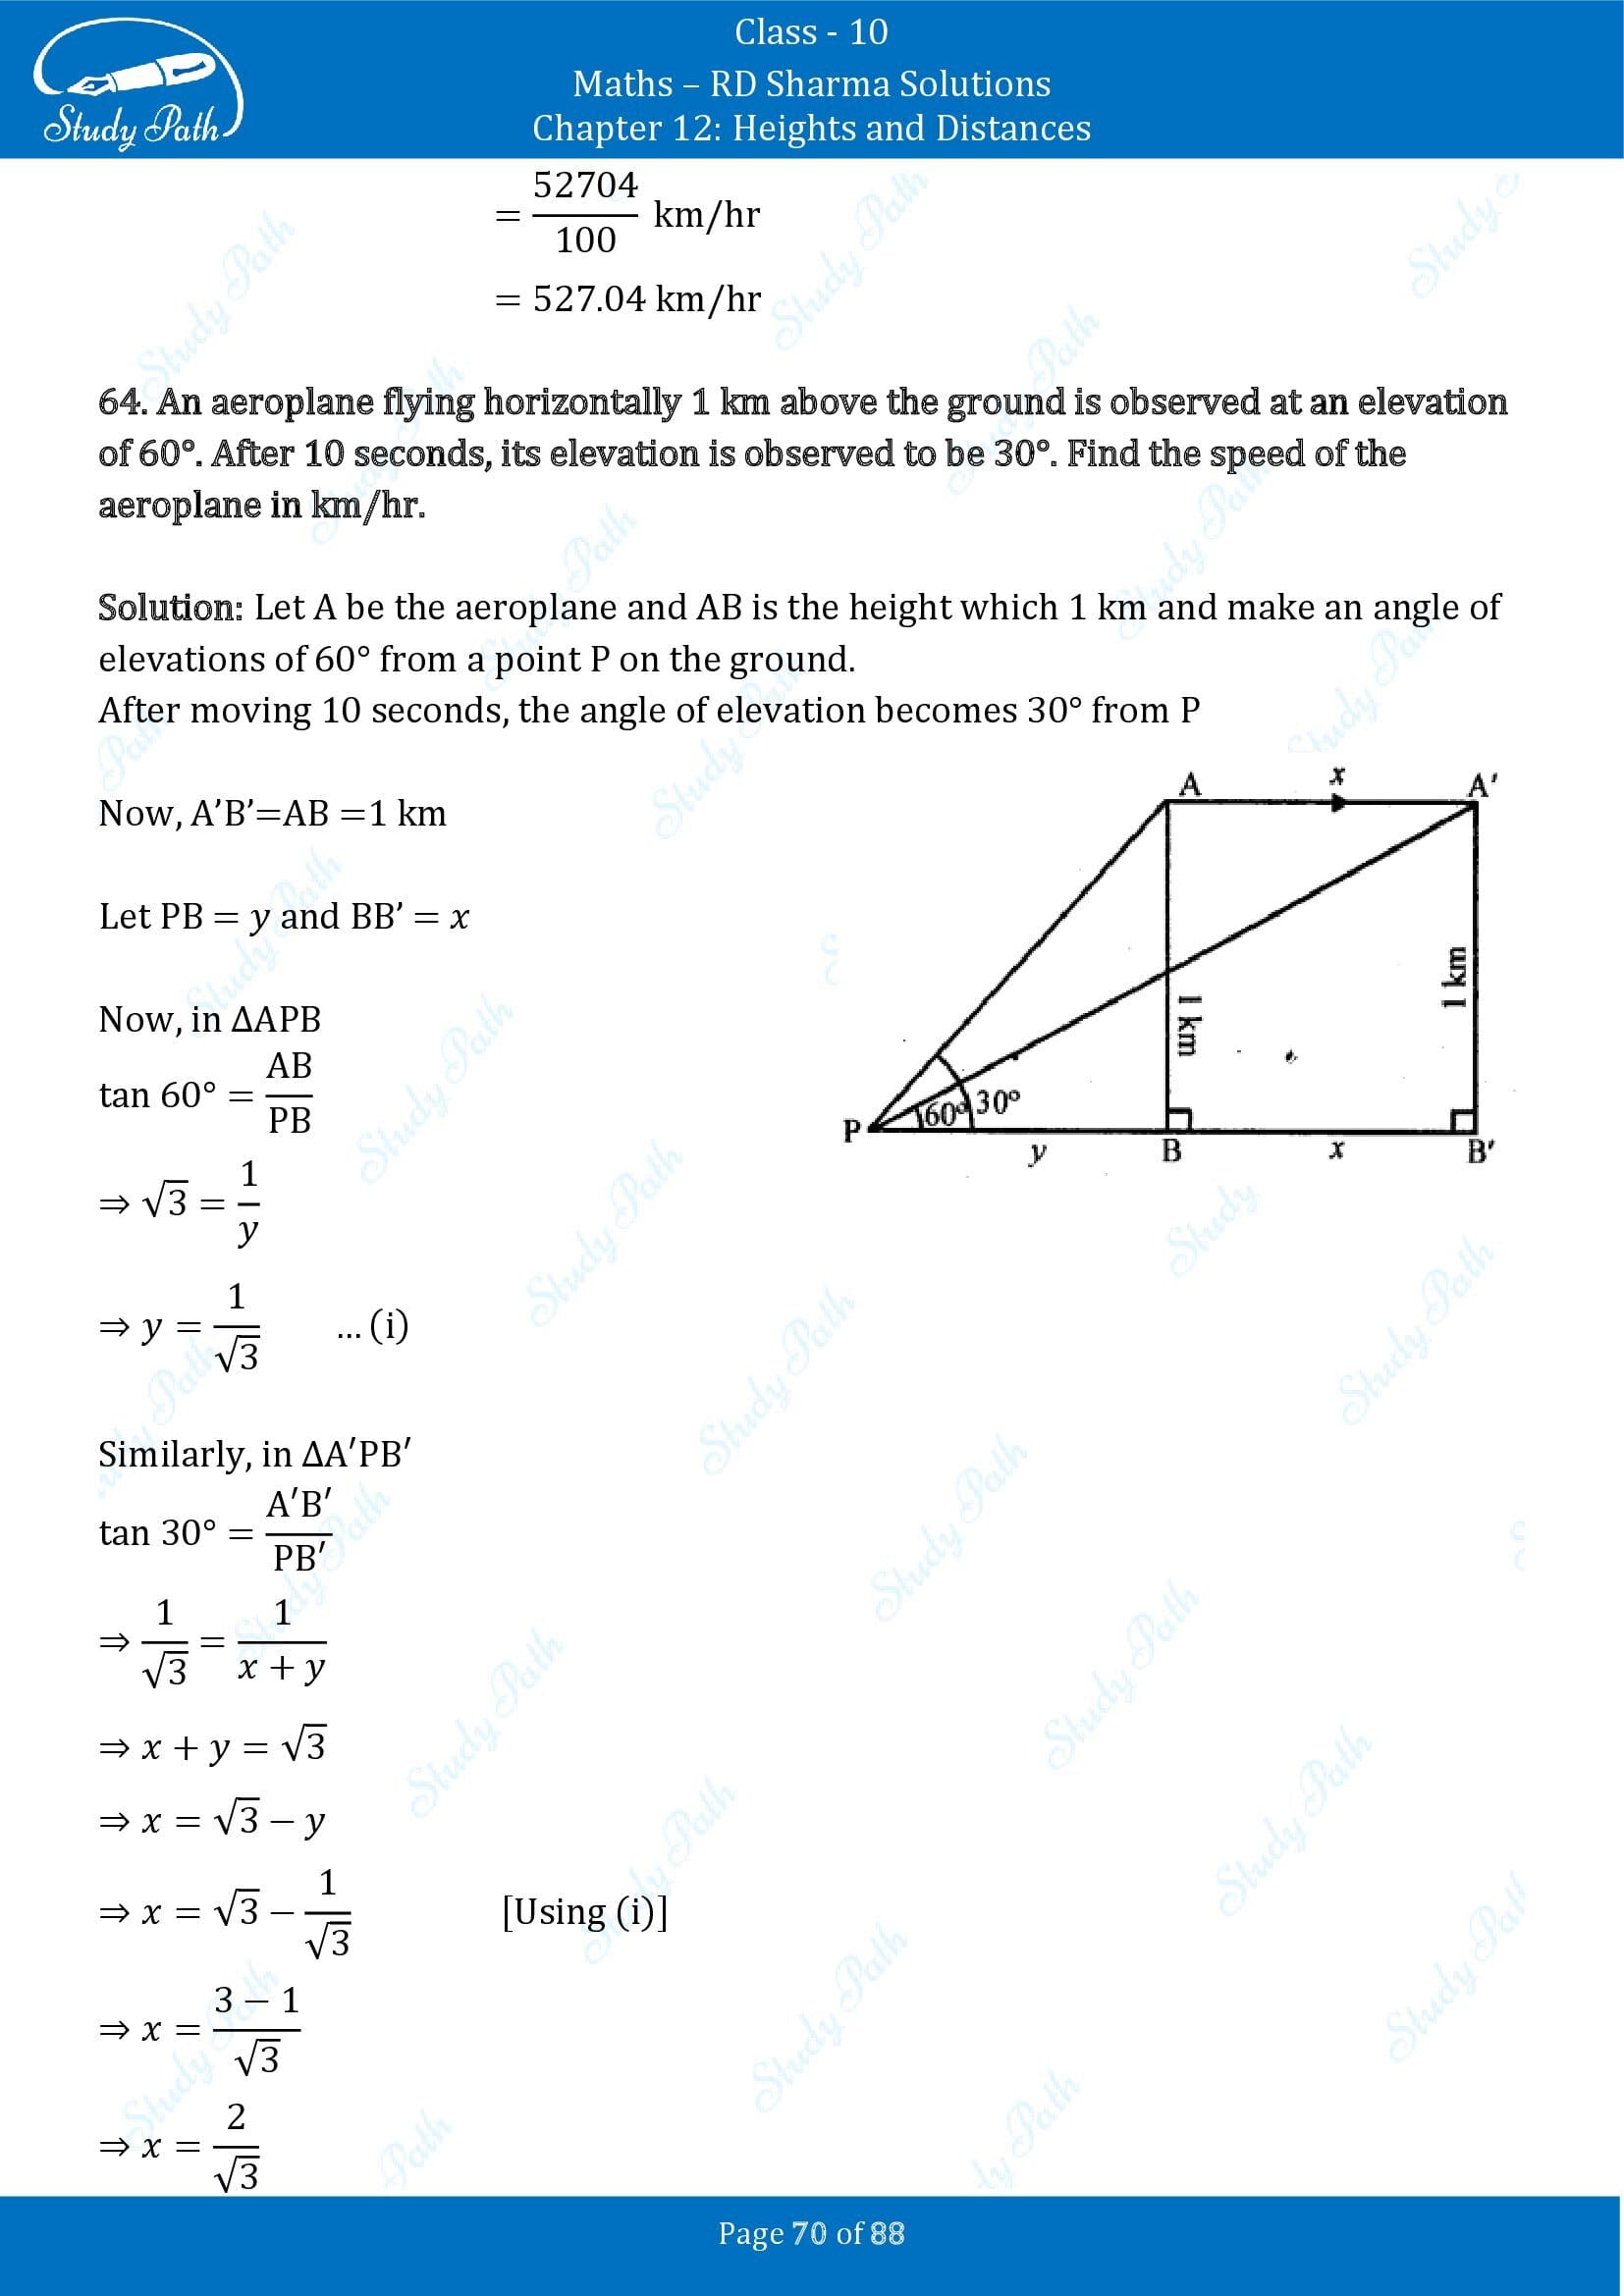 RD Sharma Solutions Class 10 Chapter 12 Heights and Distances Exercise 12.1 00070